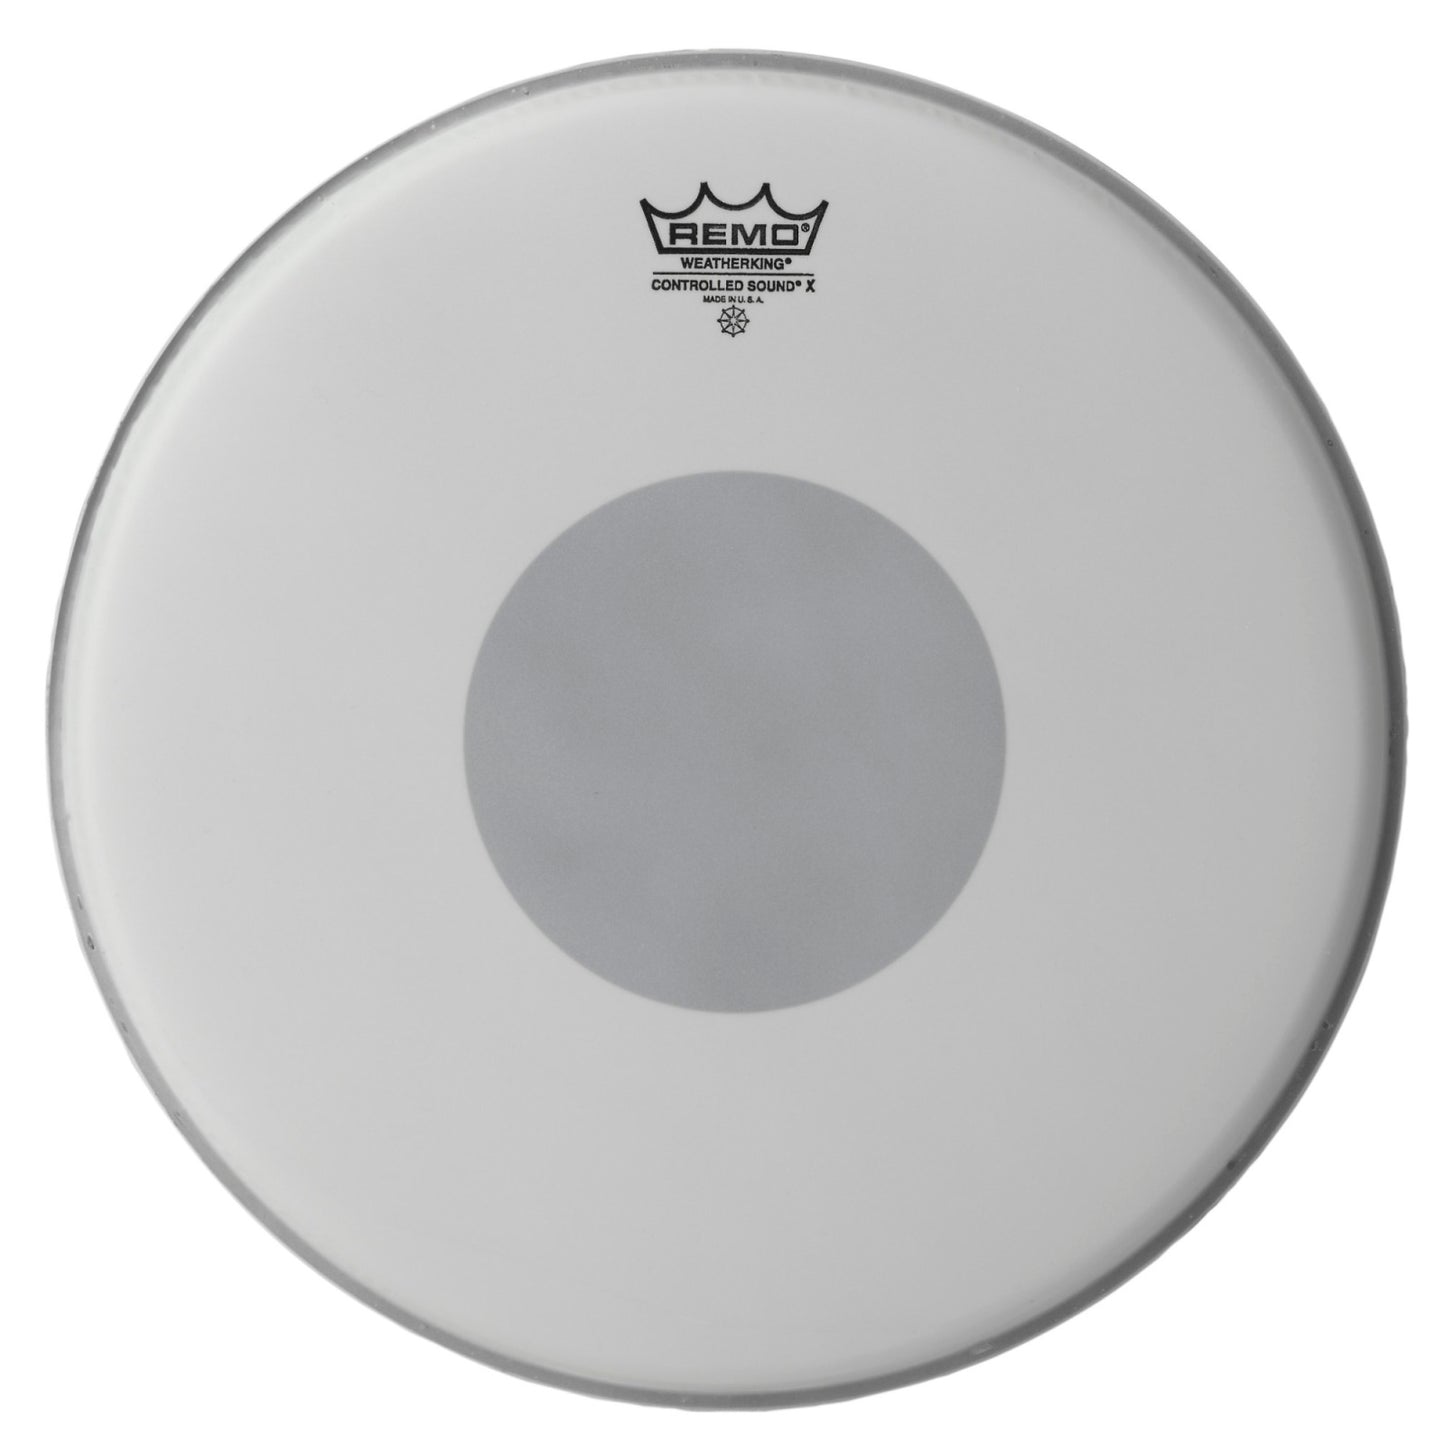 Remo Weatherking Controlled Sound X Coated Drumhead with Reverse Black Dot, 14 Inch